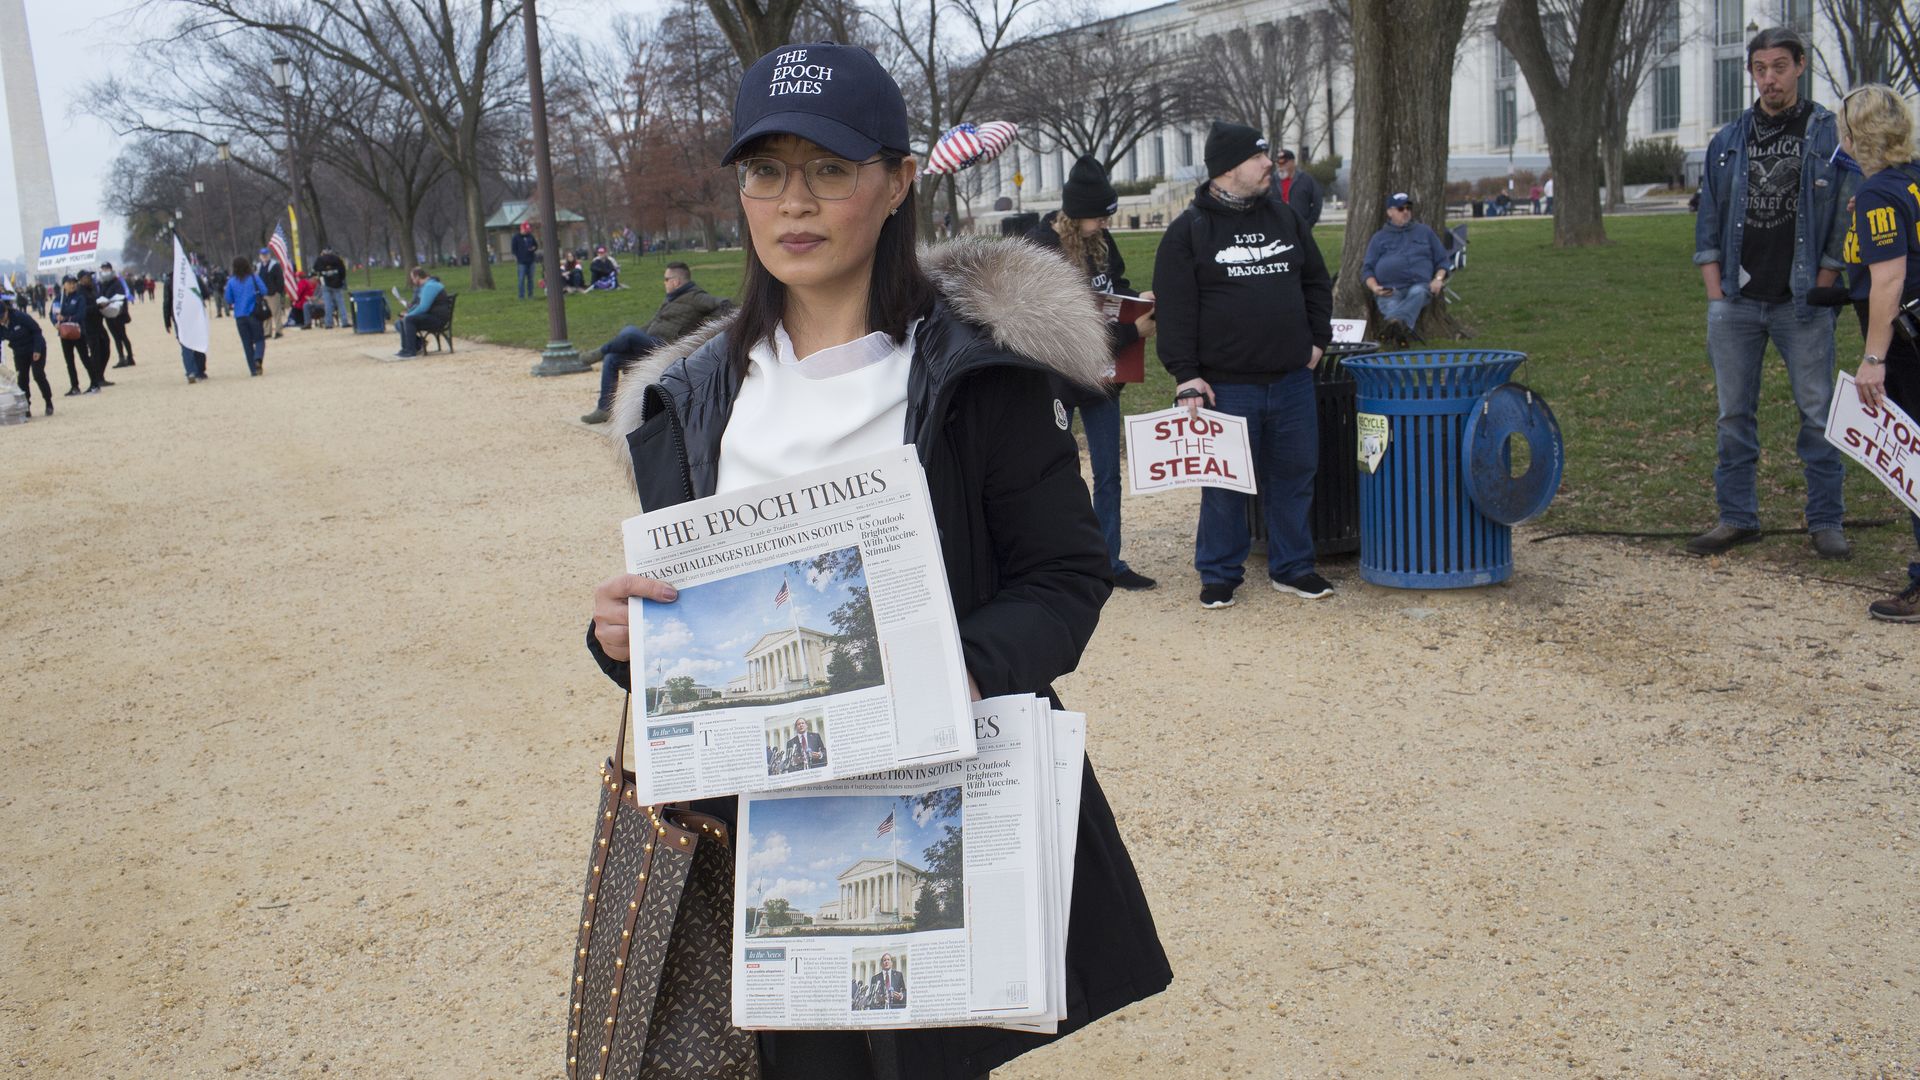 A vendor is seen distributing copies of the Epoch Times newspaper on the National Mall in Washington, D.C.